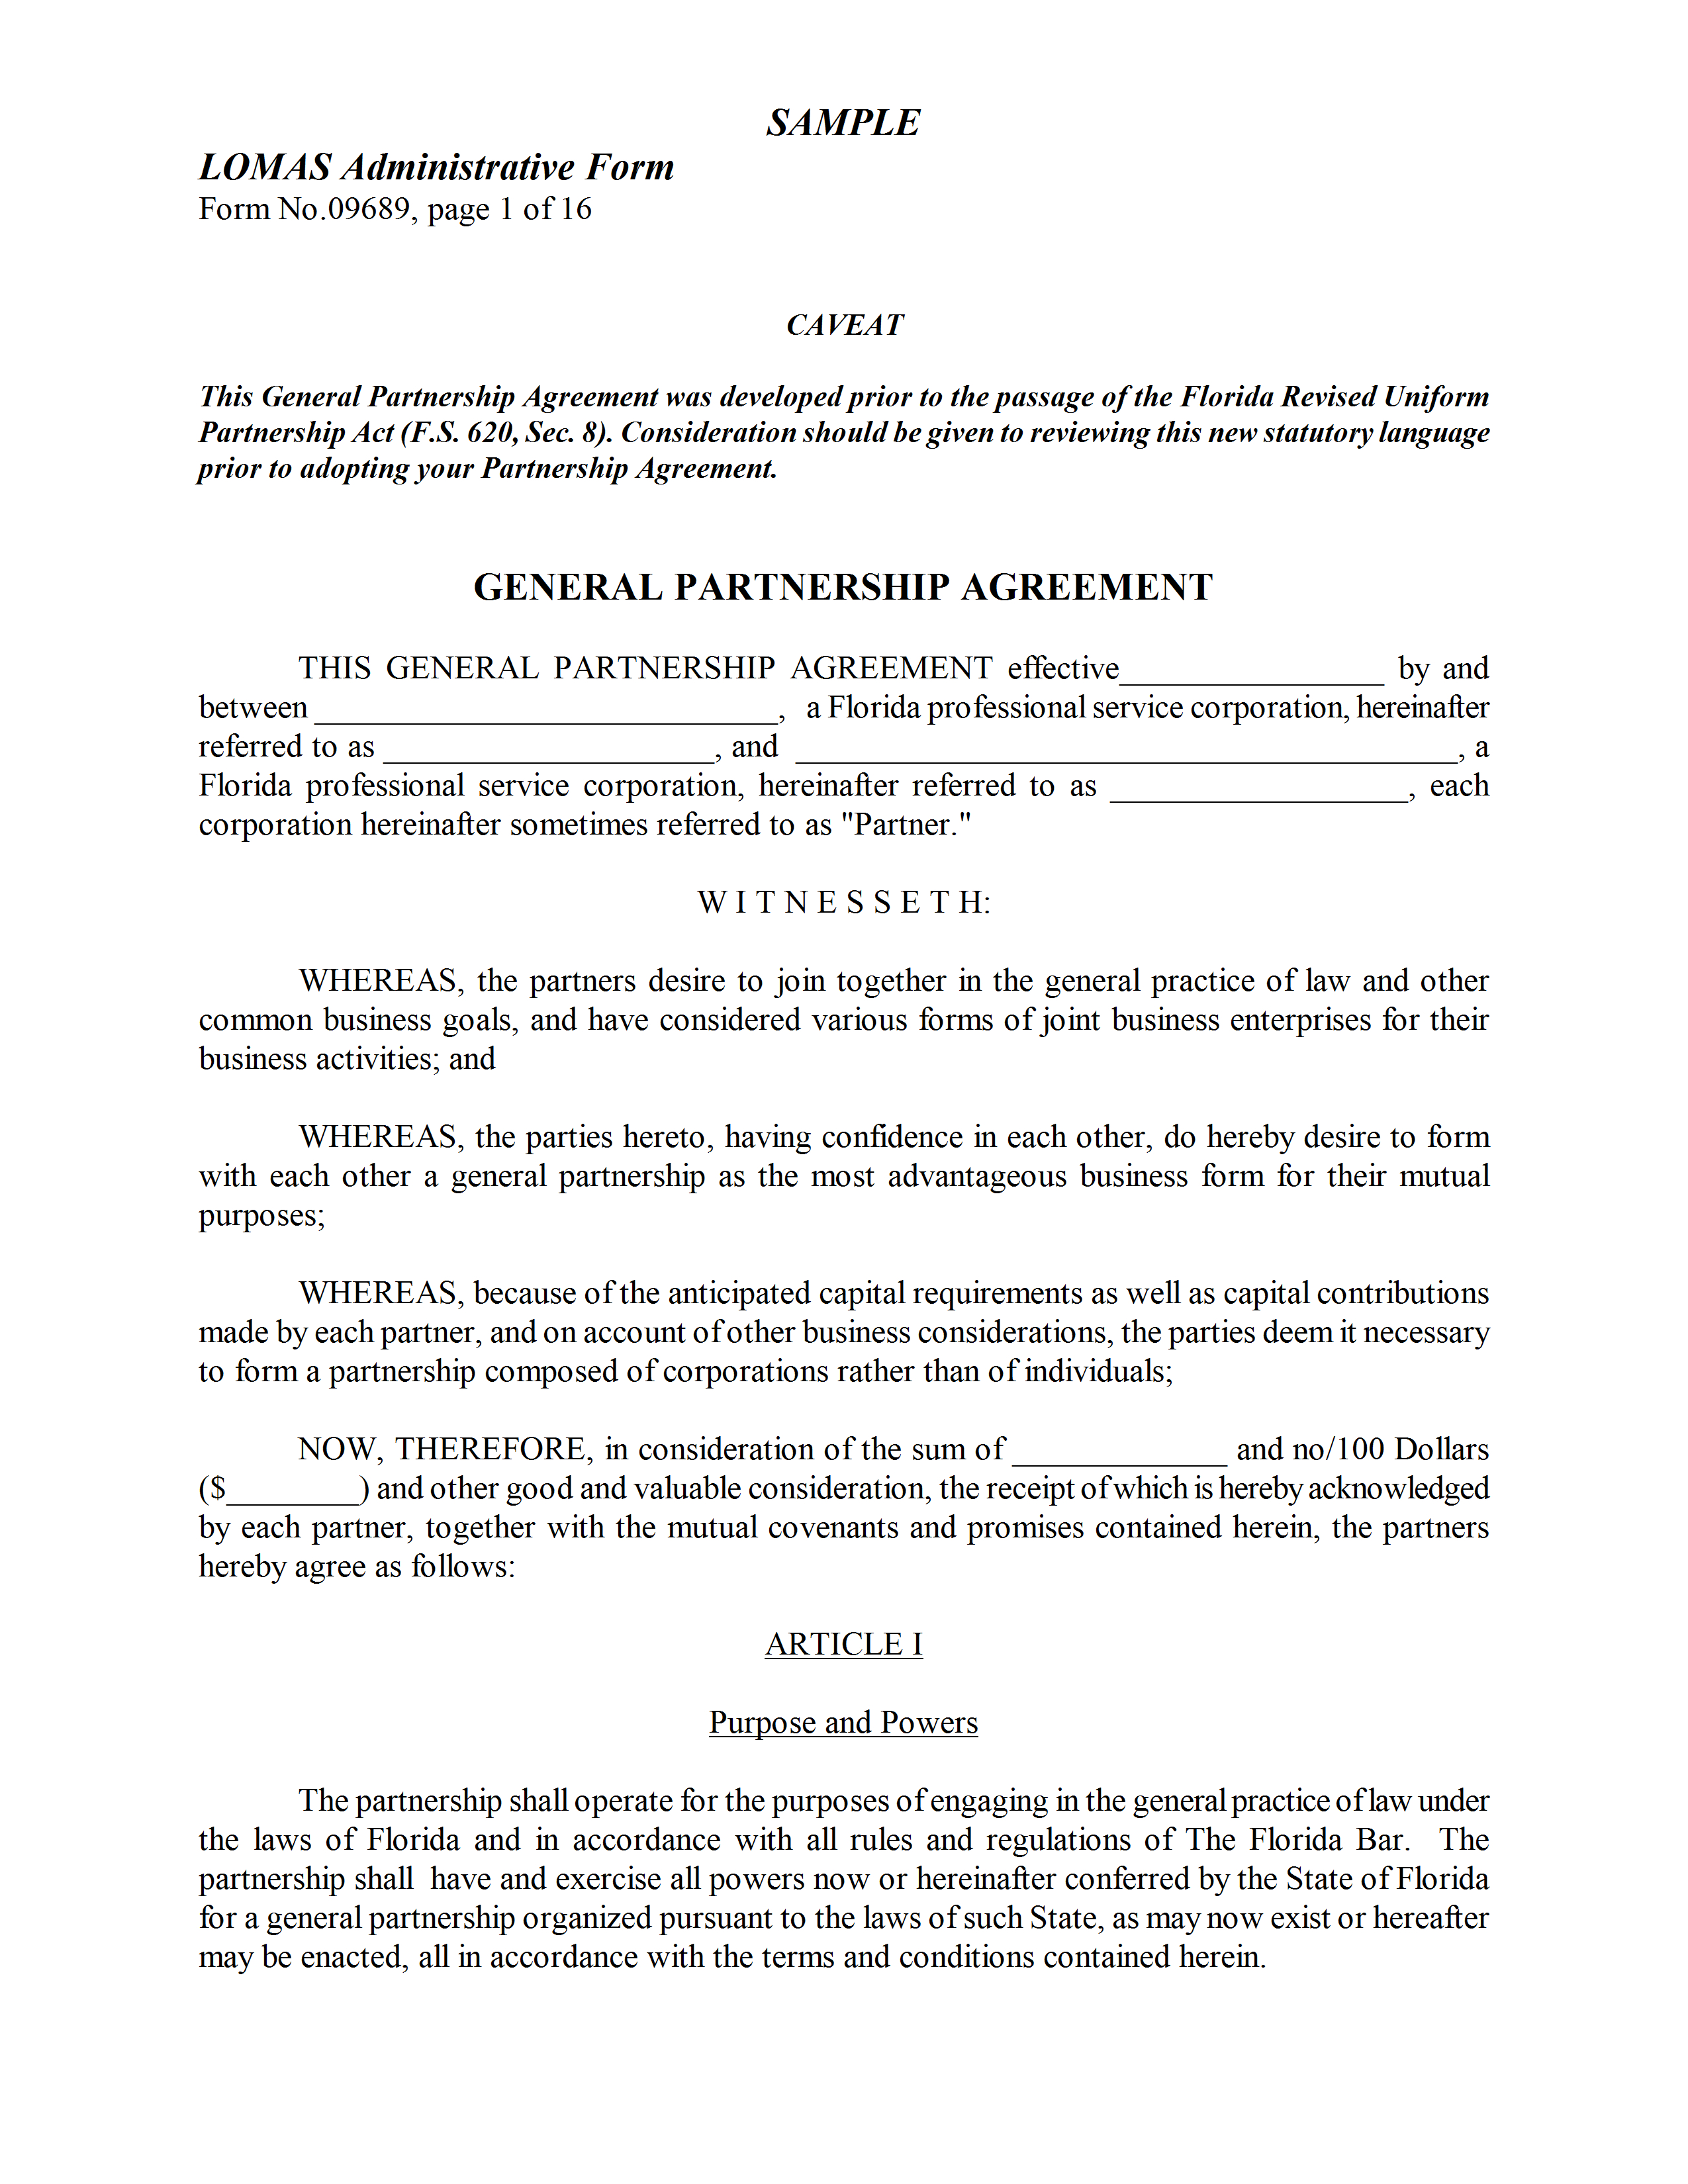 S Corp Operating Agreement Template Partnership Agreement Template